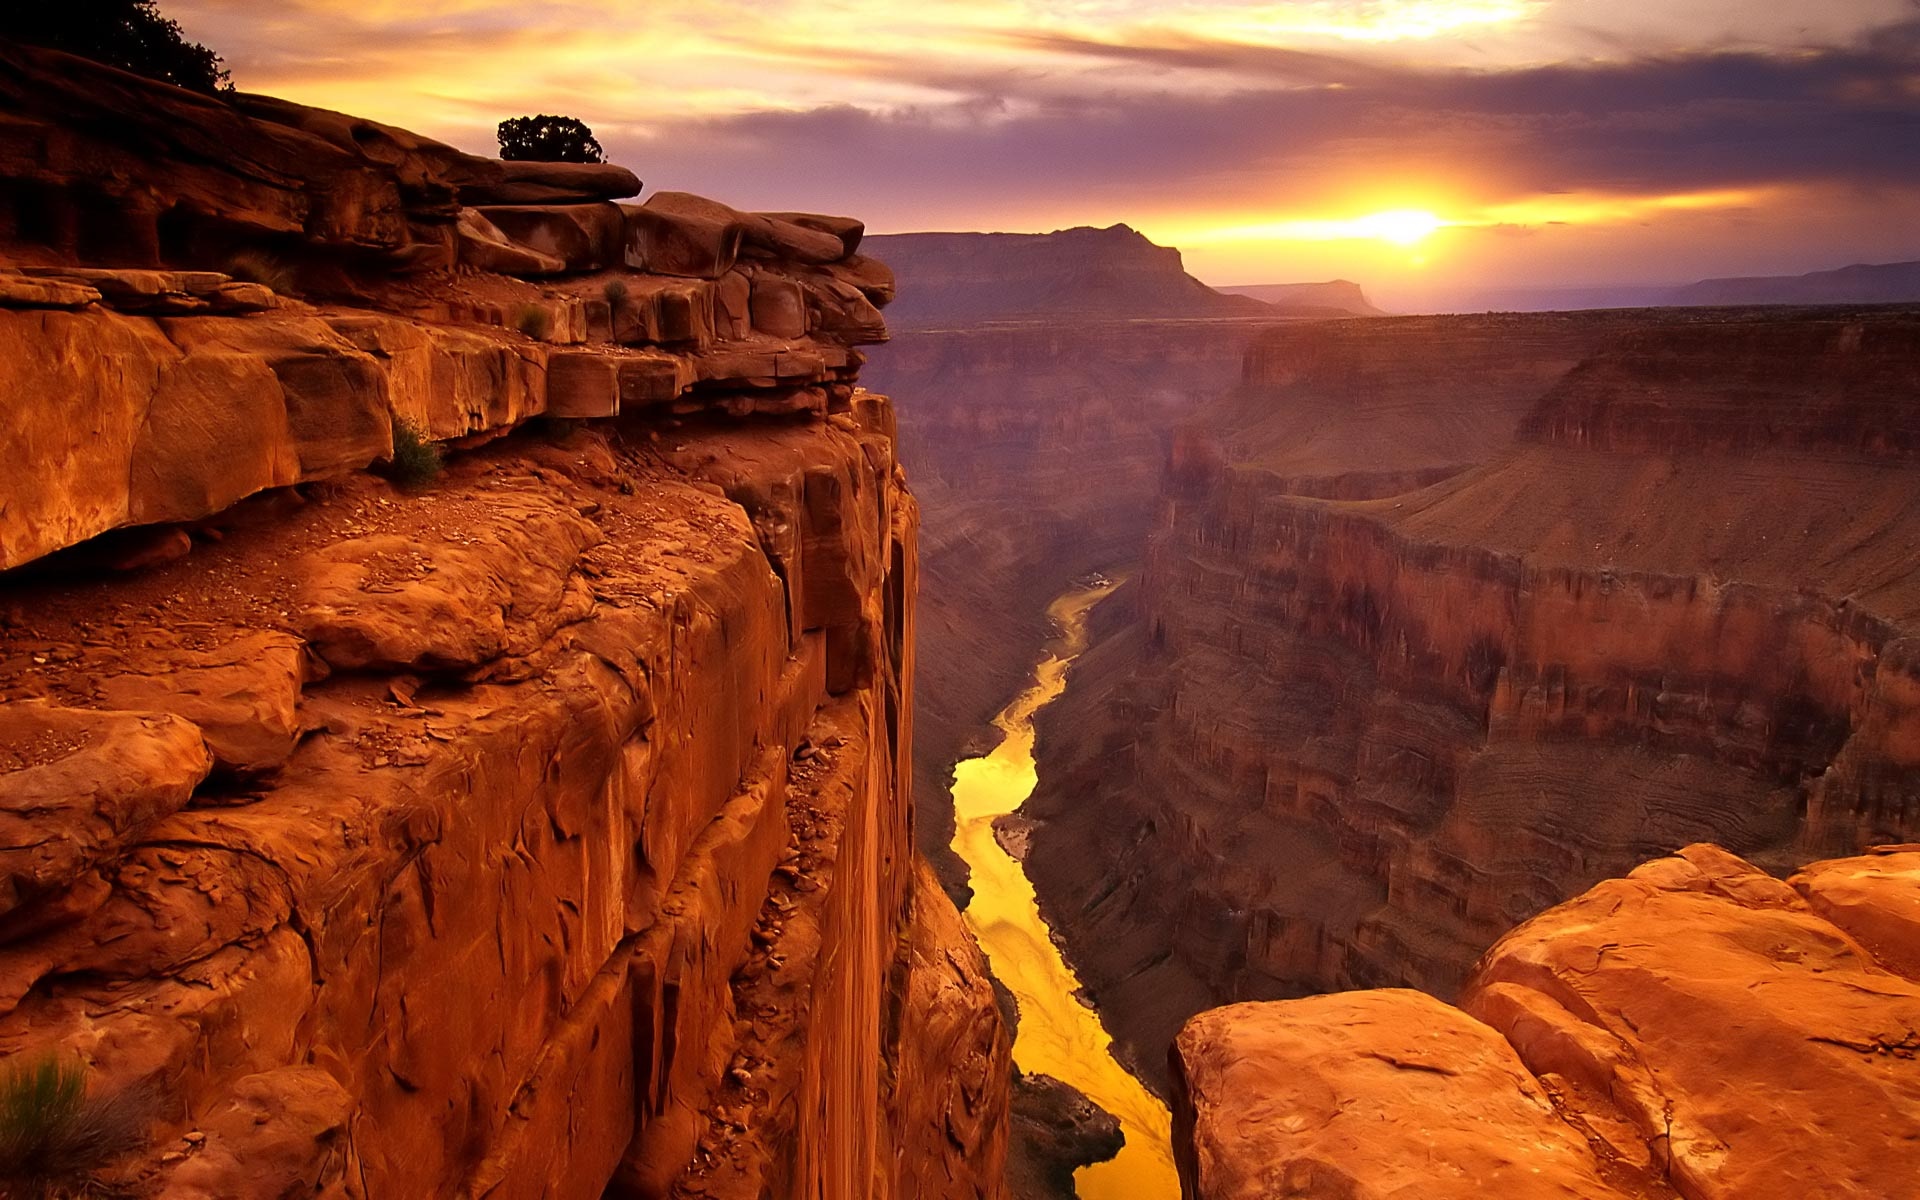 Colorado River, Widescreen wallpapers, High-quality images, Beautiful backgrounds, 1920x1200 HD Desktop